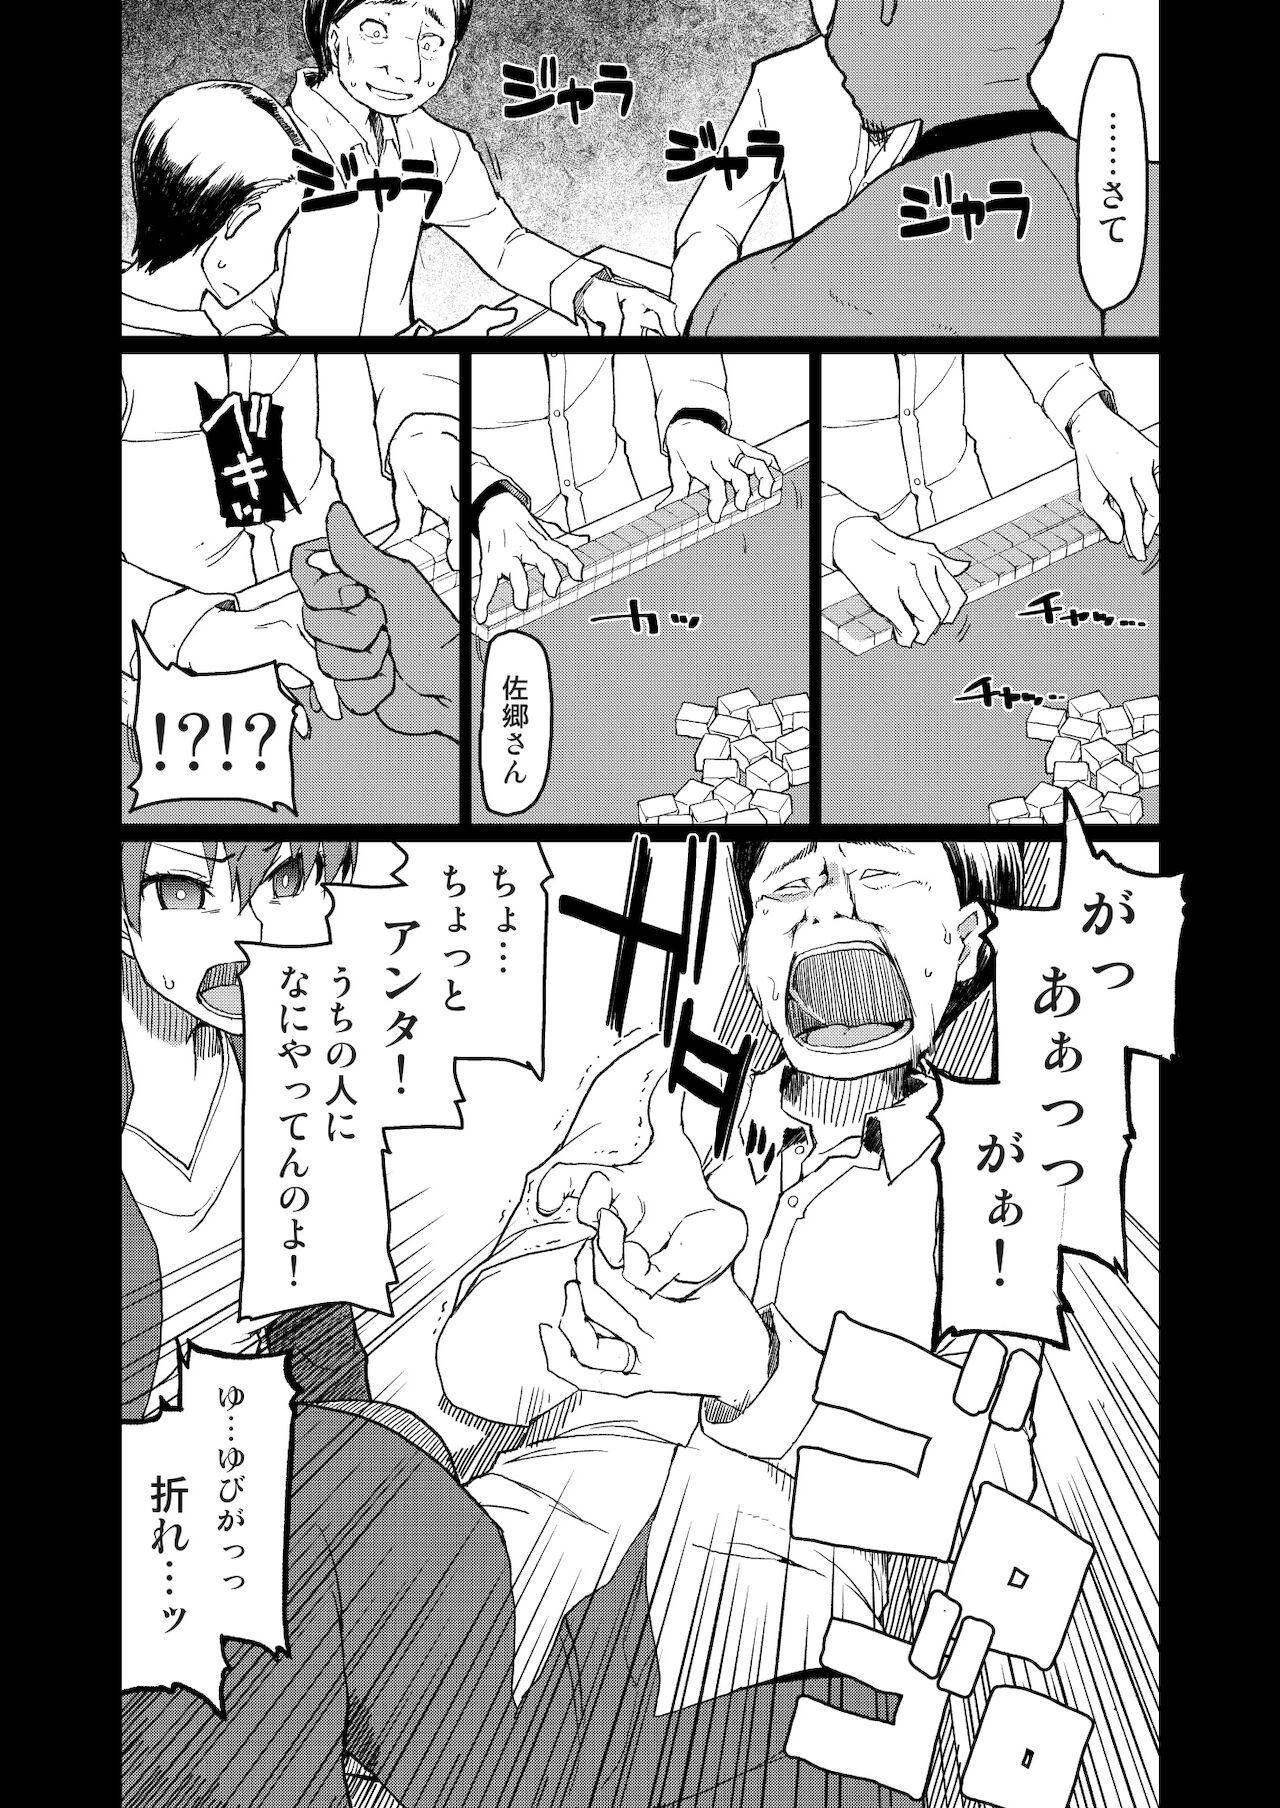 France [Metamor (Ryo)] SYG -Sell your girlfriend-2 [DL版] - Original Male - Page 9